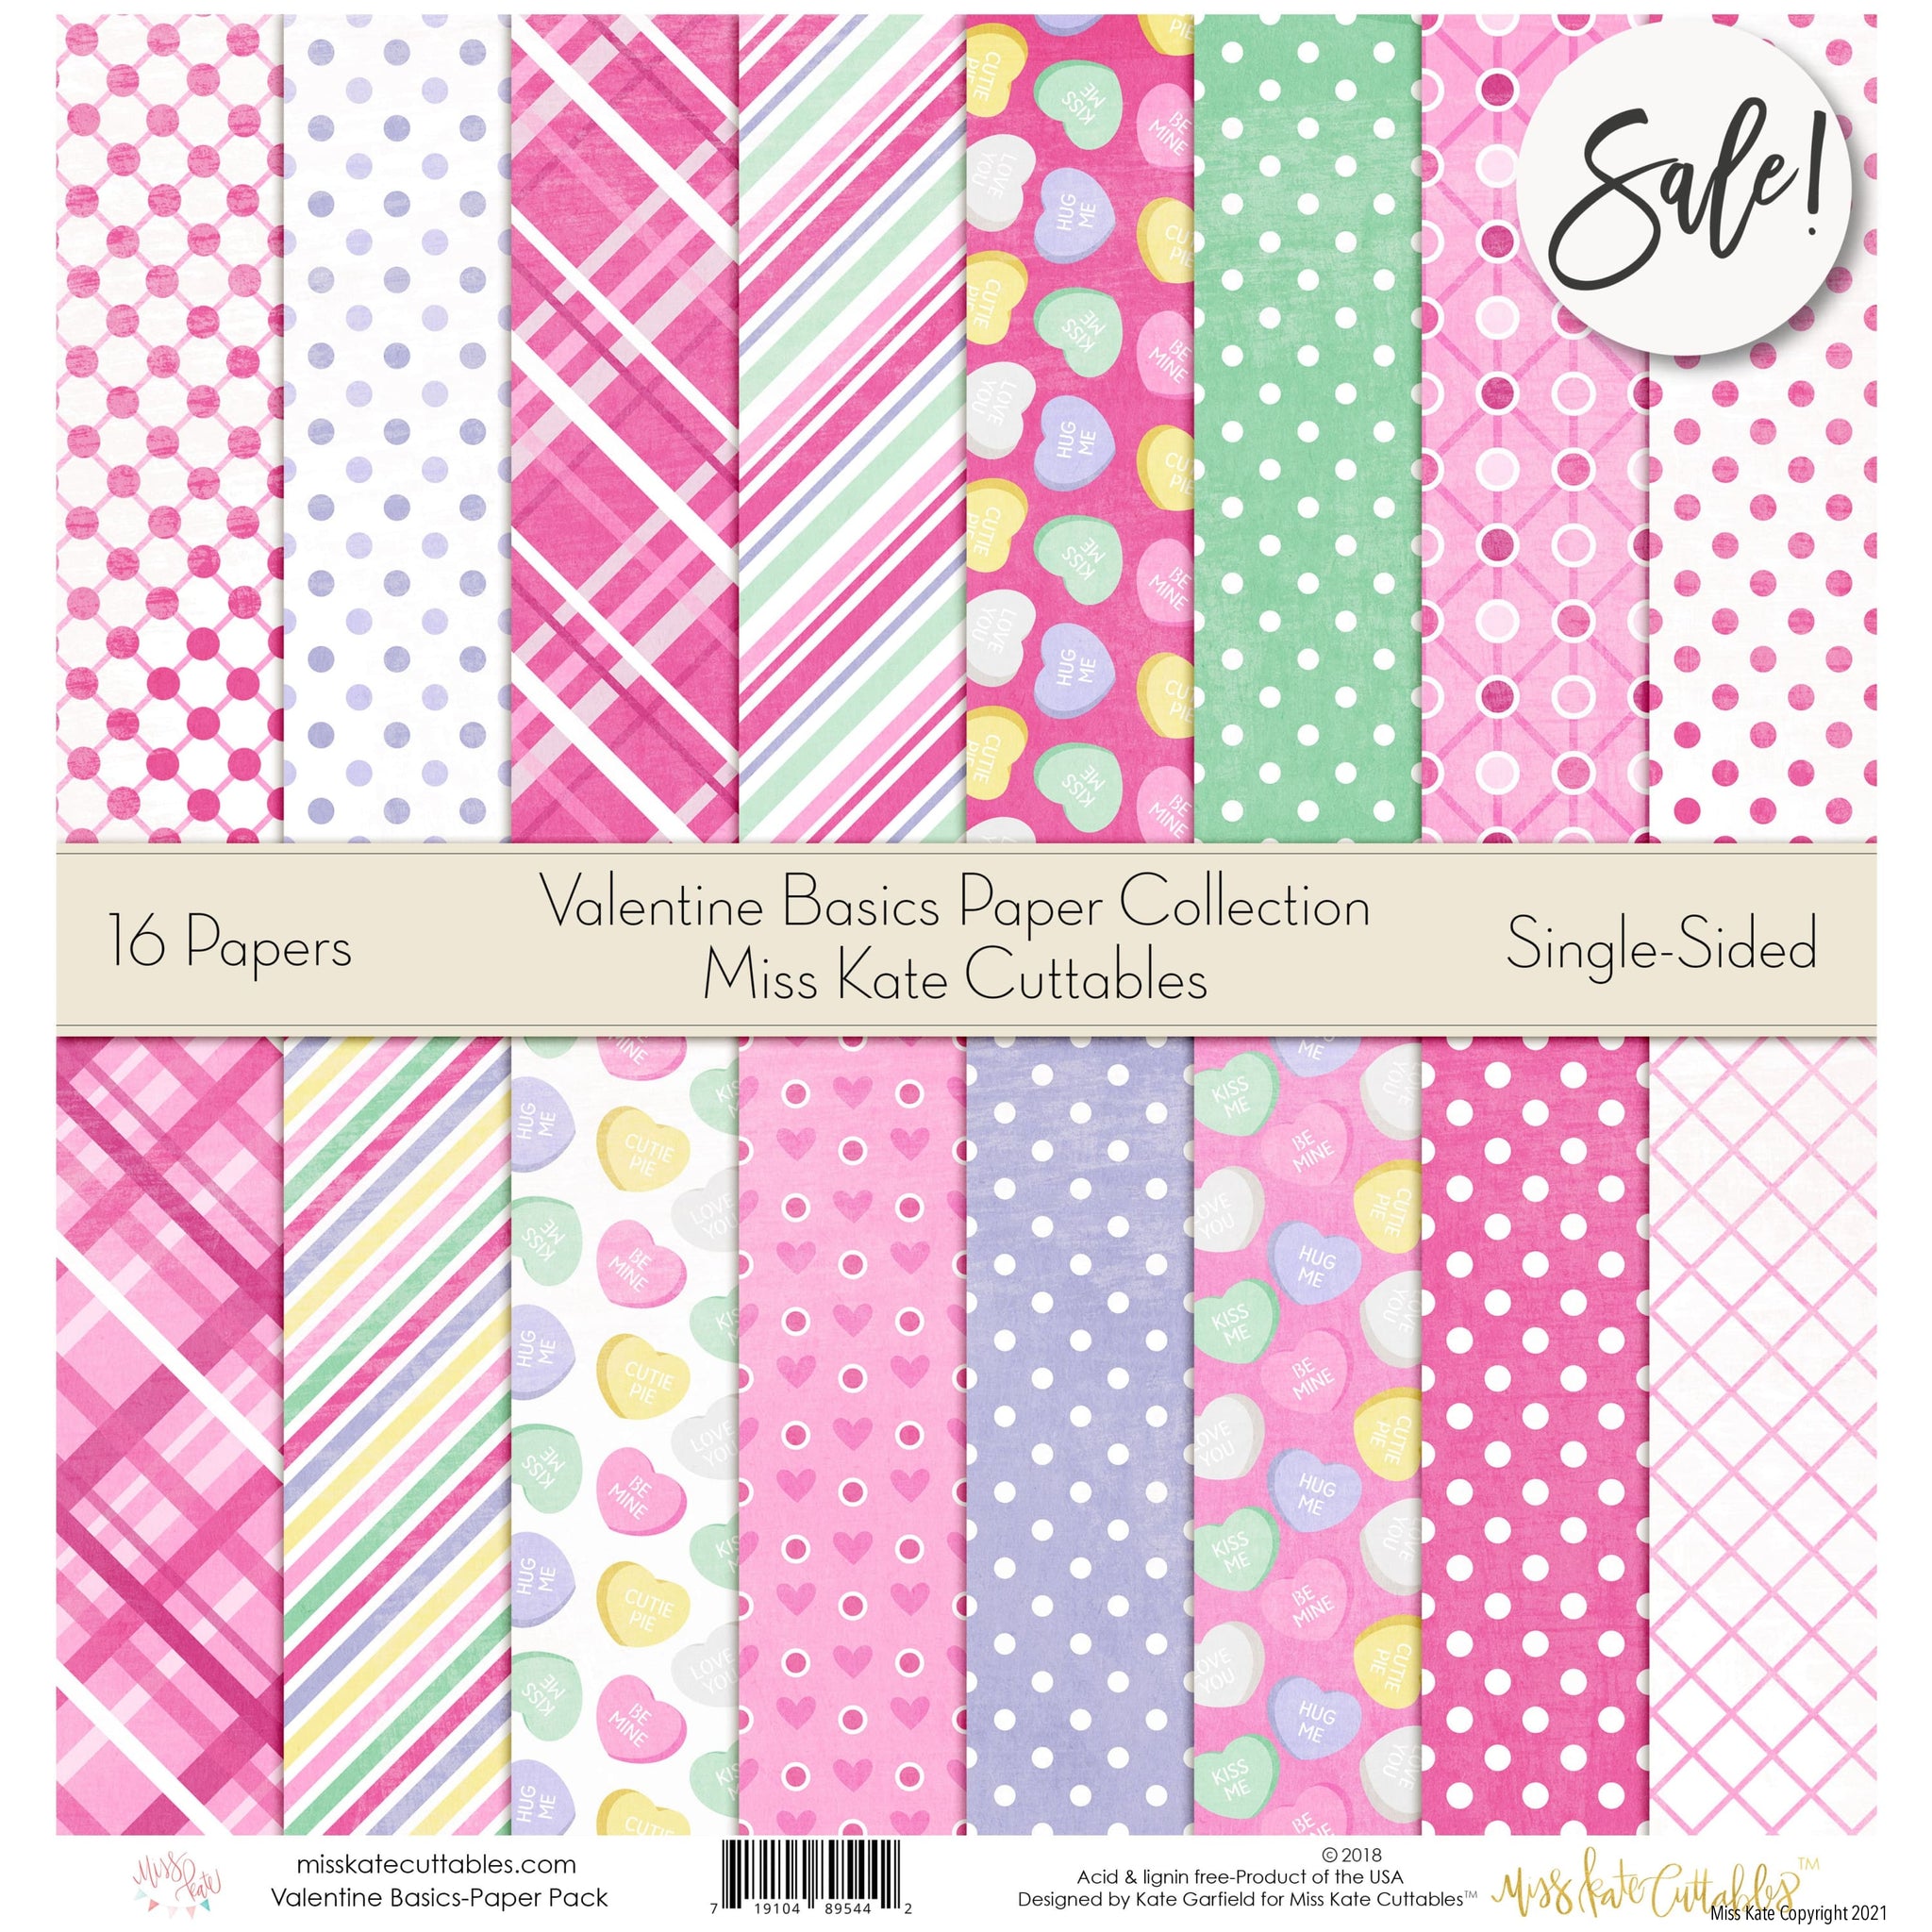 Pattern Paper Pack - Sending Love - Scrapbook Premium Specialty Paper Single-Sided 12x12 Collection Includes 16 Sheets - by Miss Kate Cuttables